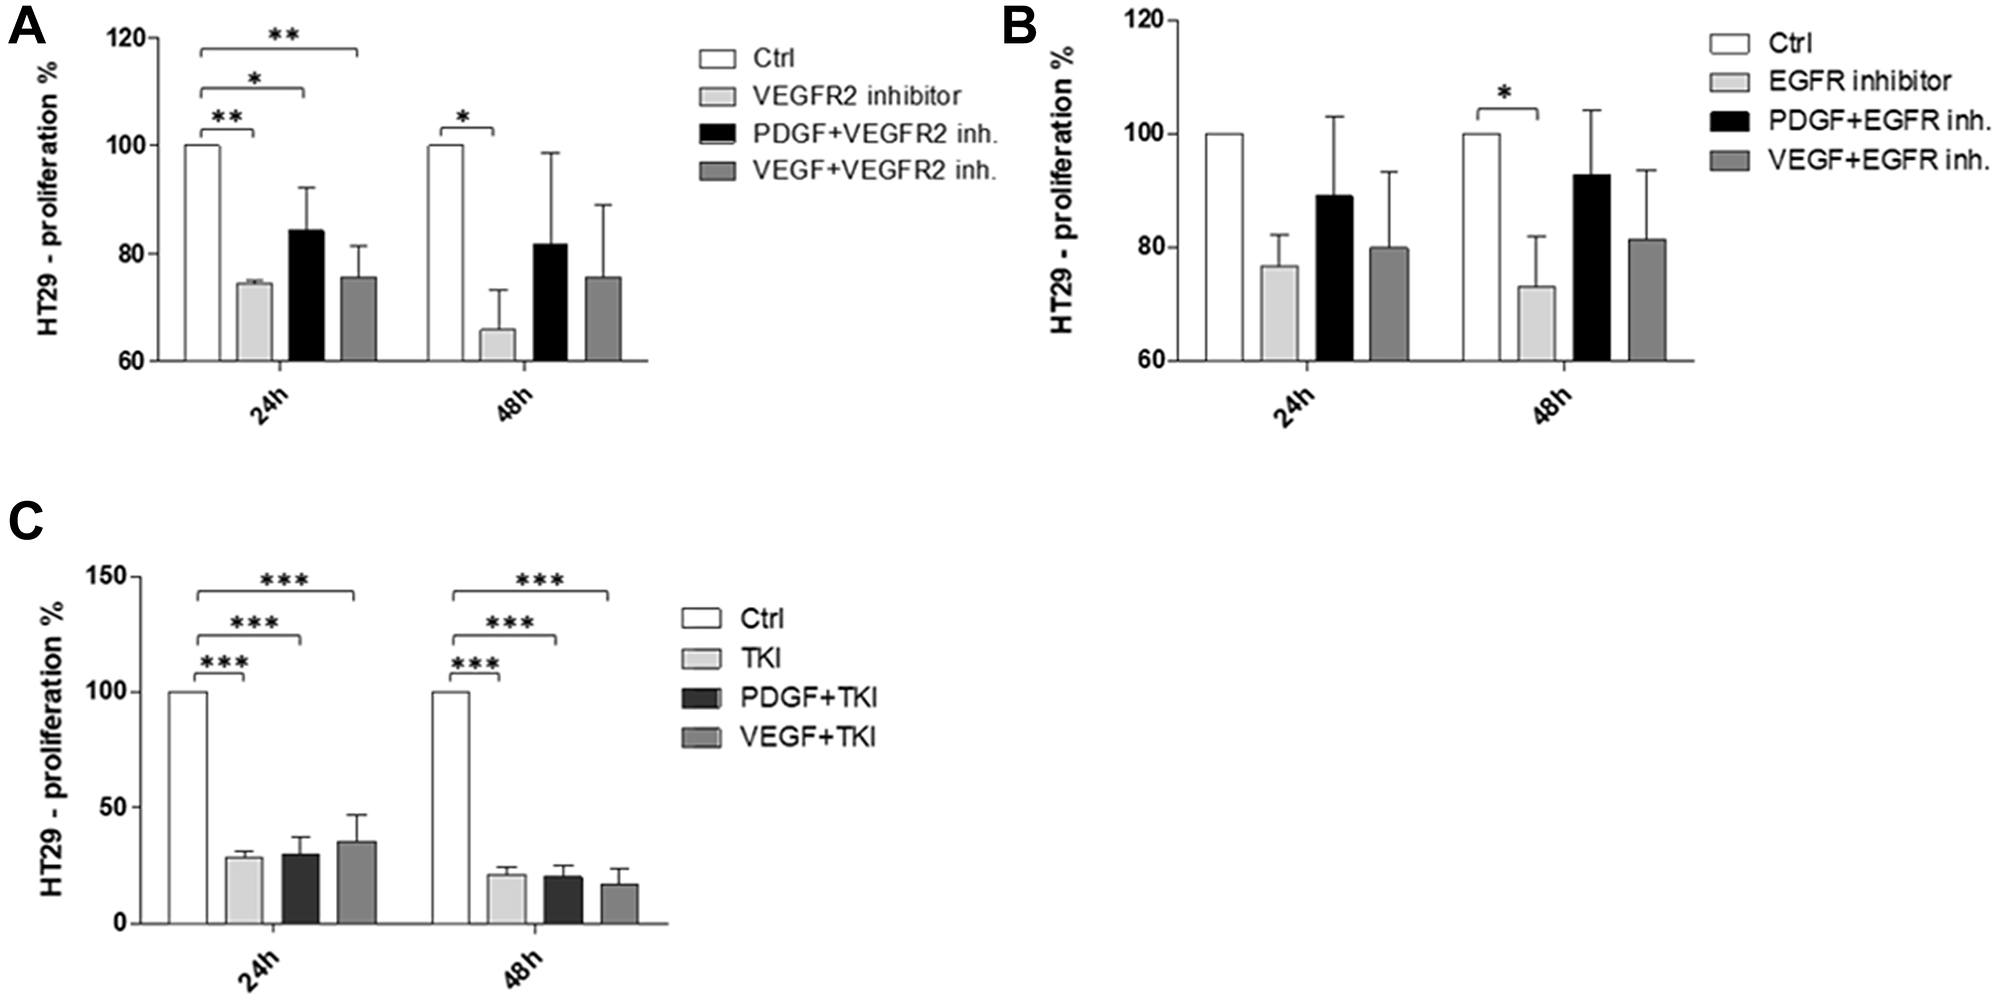 Pro-proliferative effects of PDGF on HT29 CRC cells under simultaneous inhibition of VEGFR2 or EGFR.